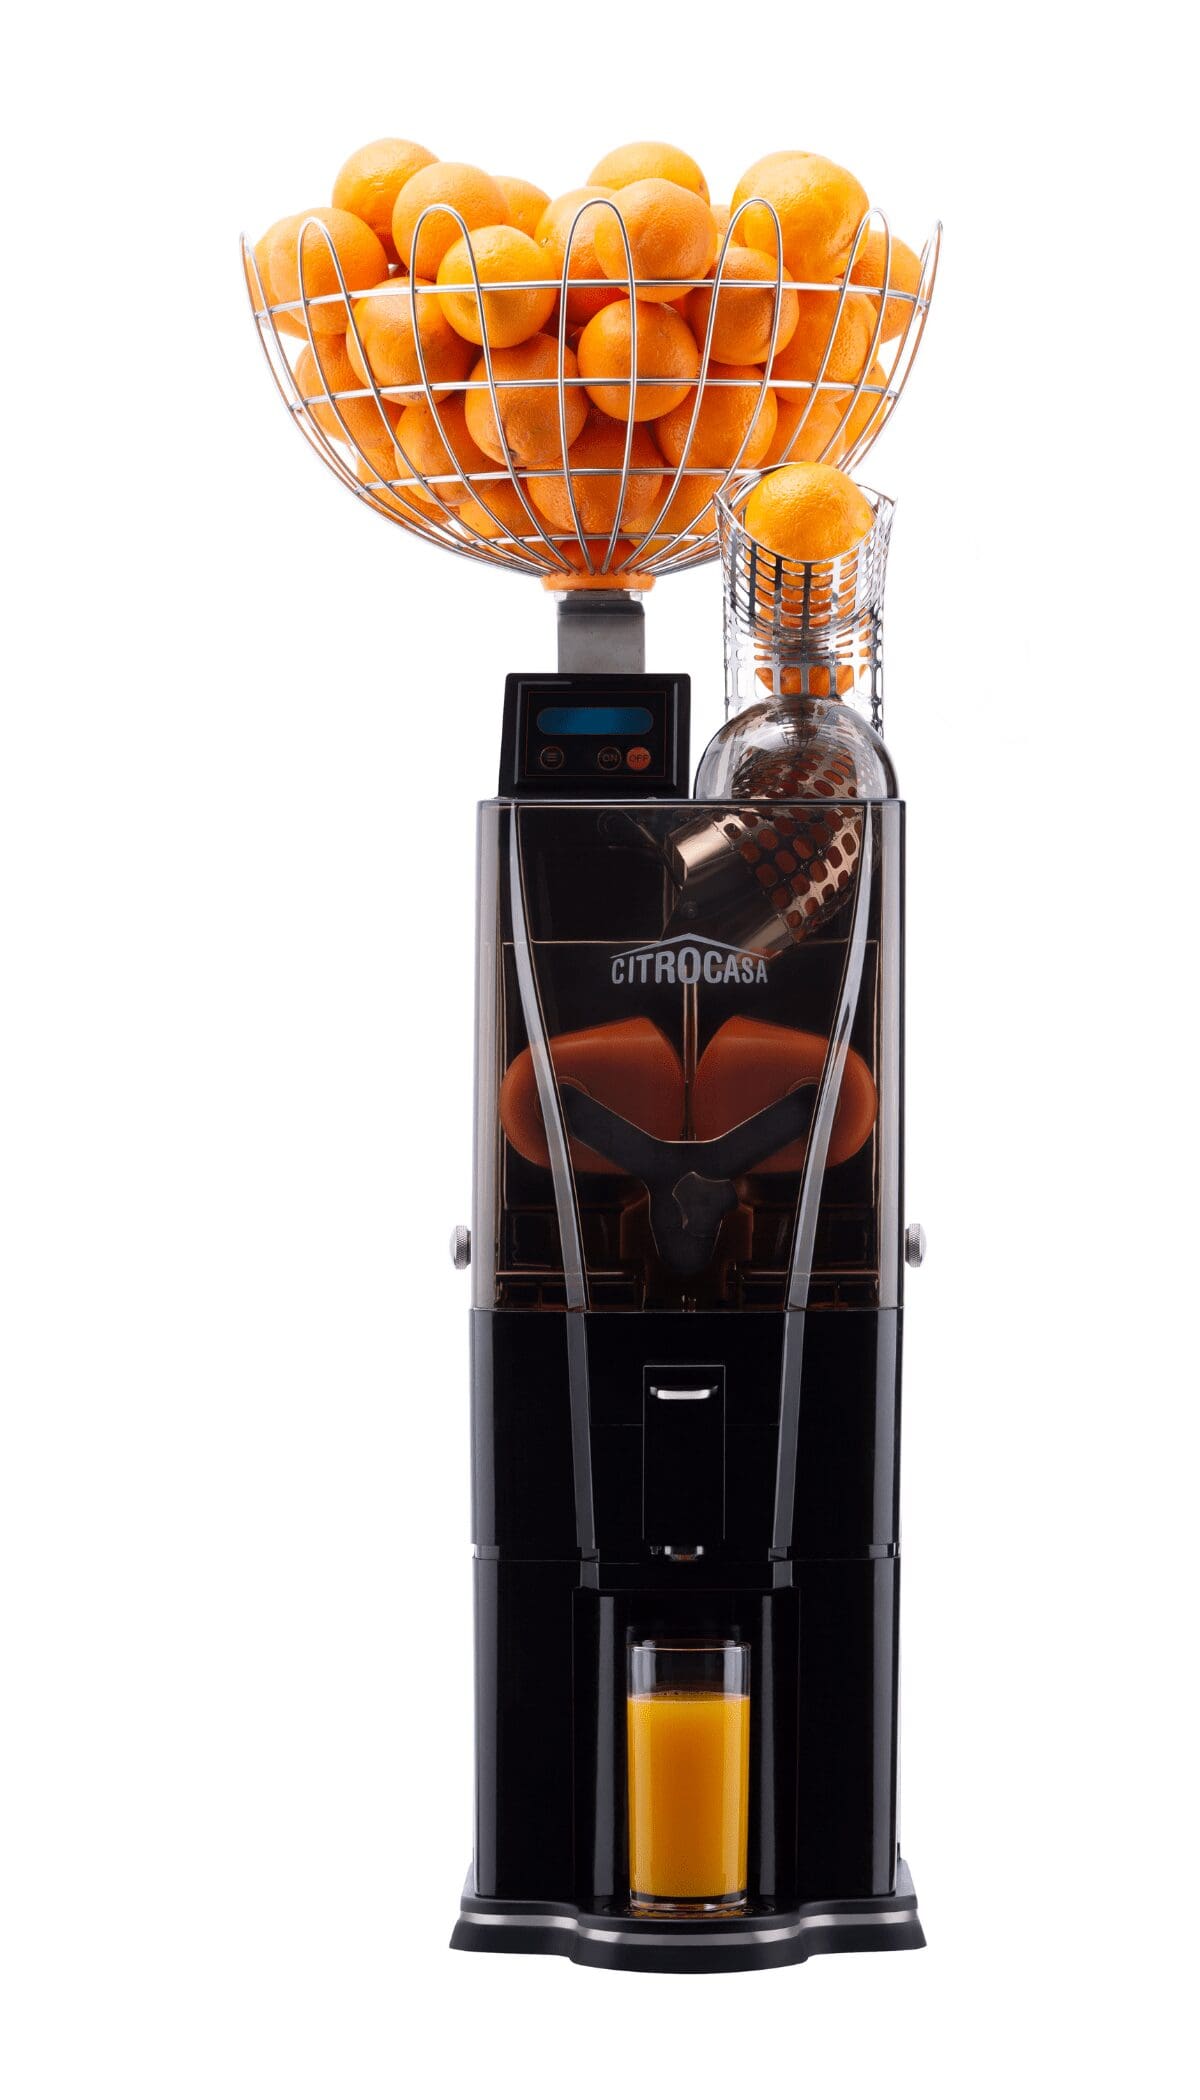 A commercial juicer machine is shown with a basket full of fresh citrus on top. The machine has a transparent section displaying the juicing mechanism, and a glass is placed at the bottom to catch the freshly squeezed juice, showcasing Citrus America’s premium quality.